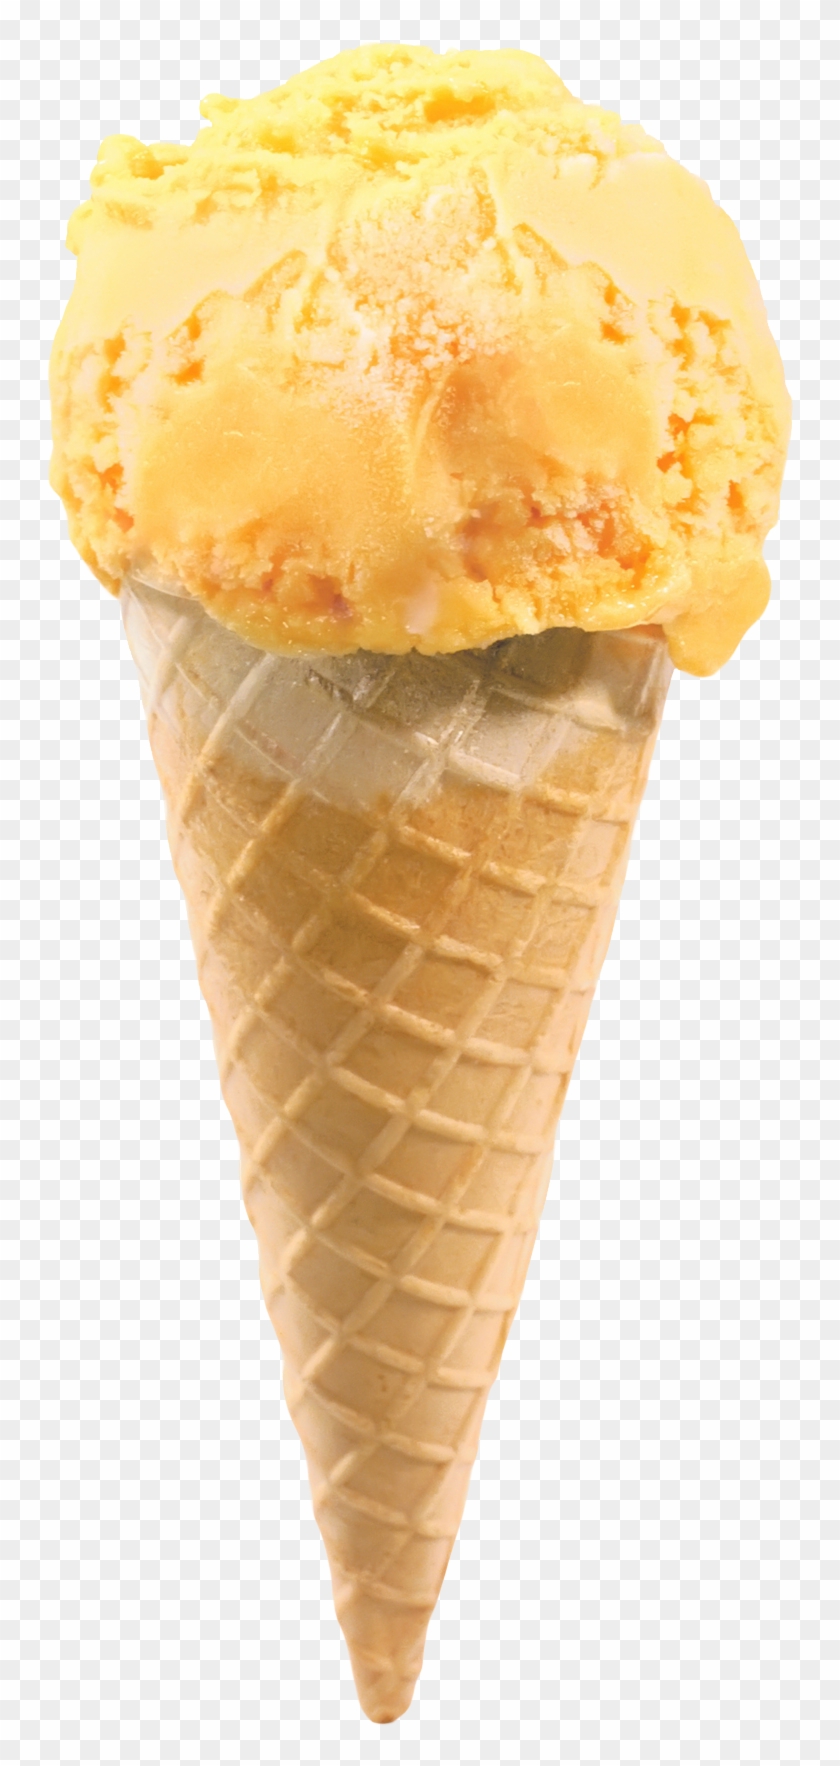 Ice Cream With Cone Png Transparent Image - Ice-cream Scoop - Microwaveable #547131